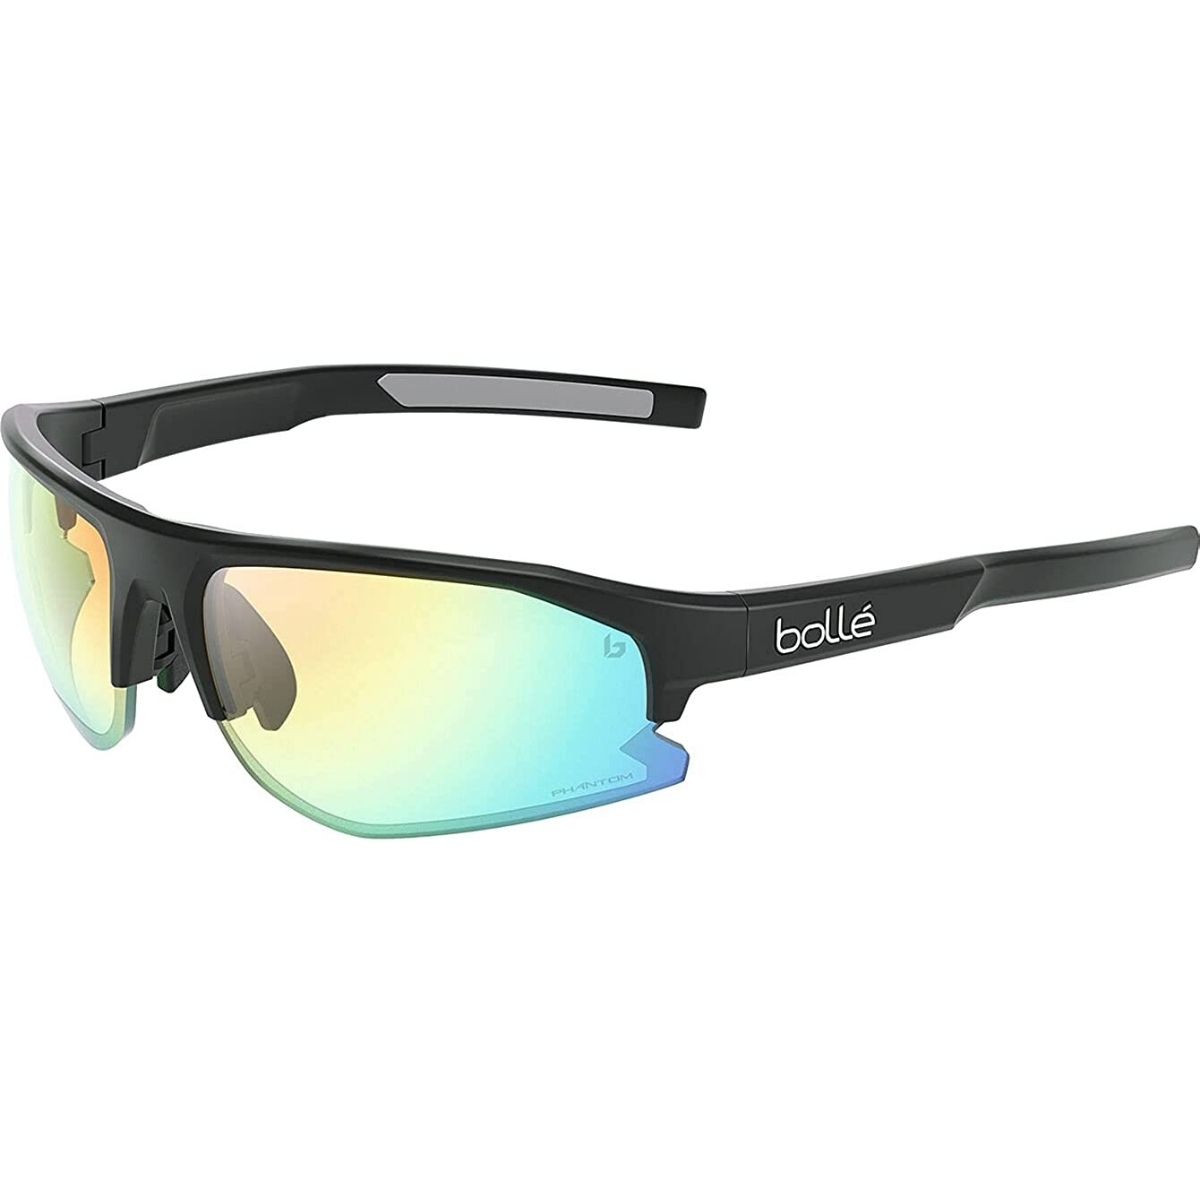 The Best Sunglasses for Tennis Options: Bolle Bolt 2.0